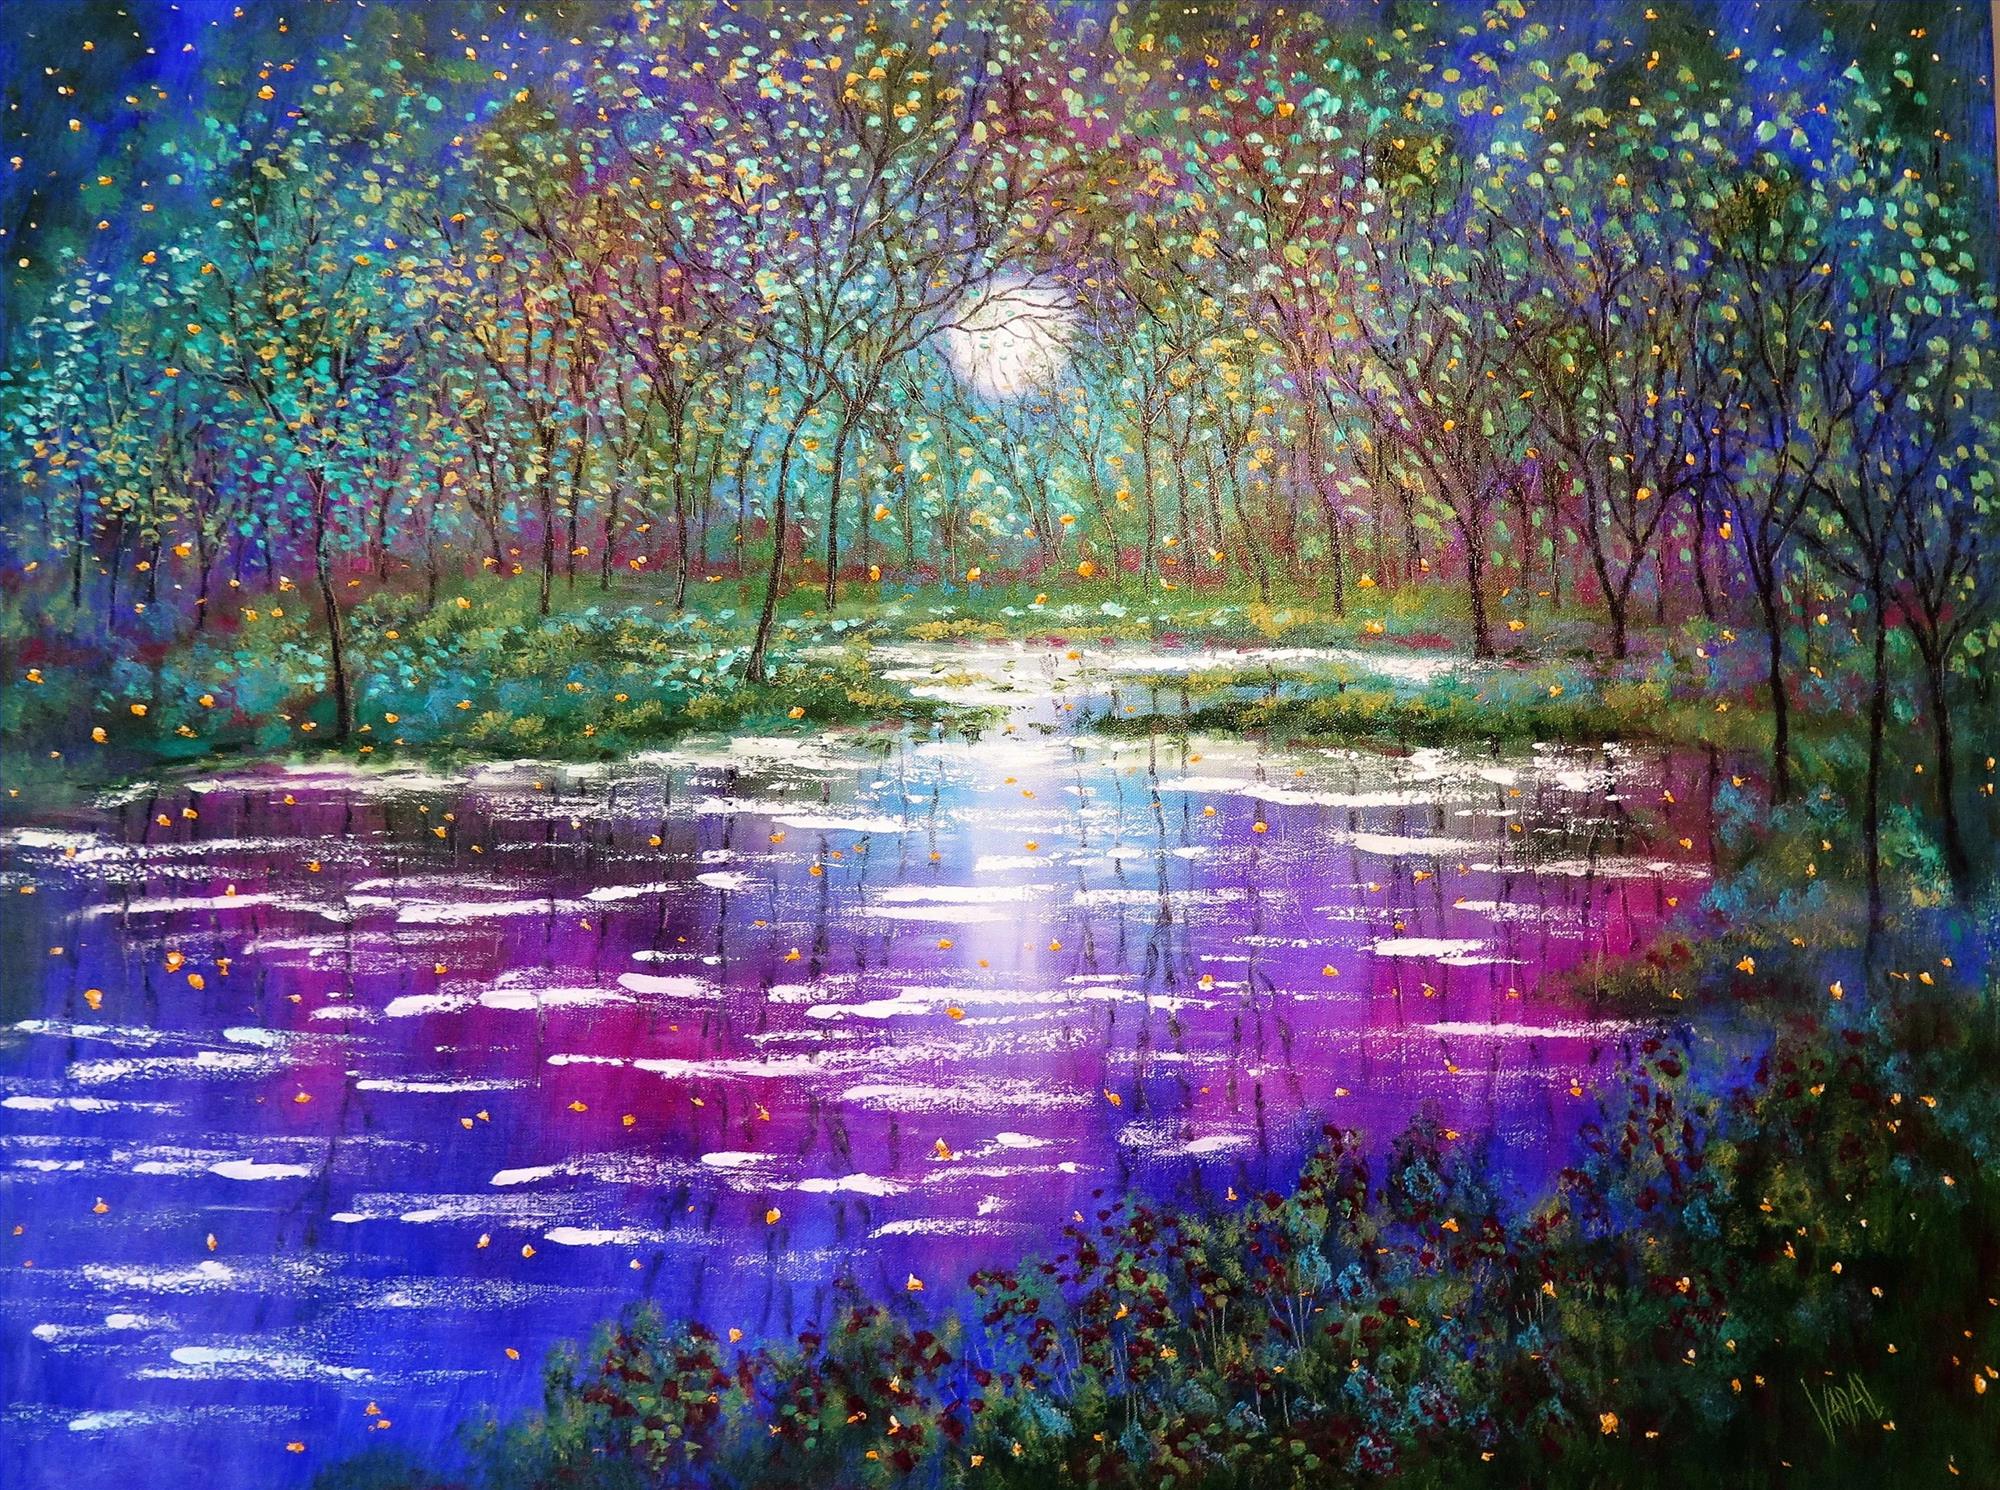 Landscape Spring Trees Lake and Fireflies garden decor scenery wall art nature landscape Oil Paintings